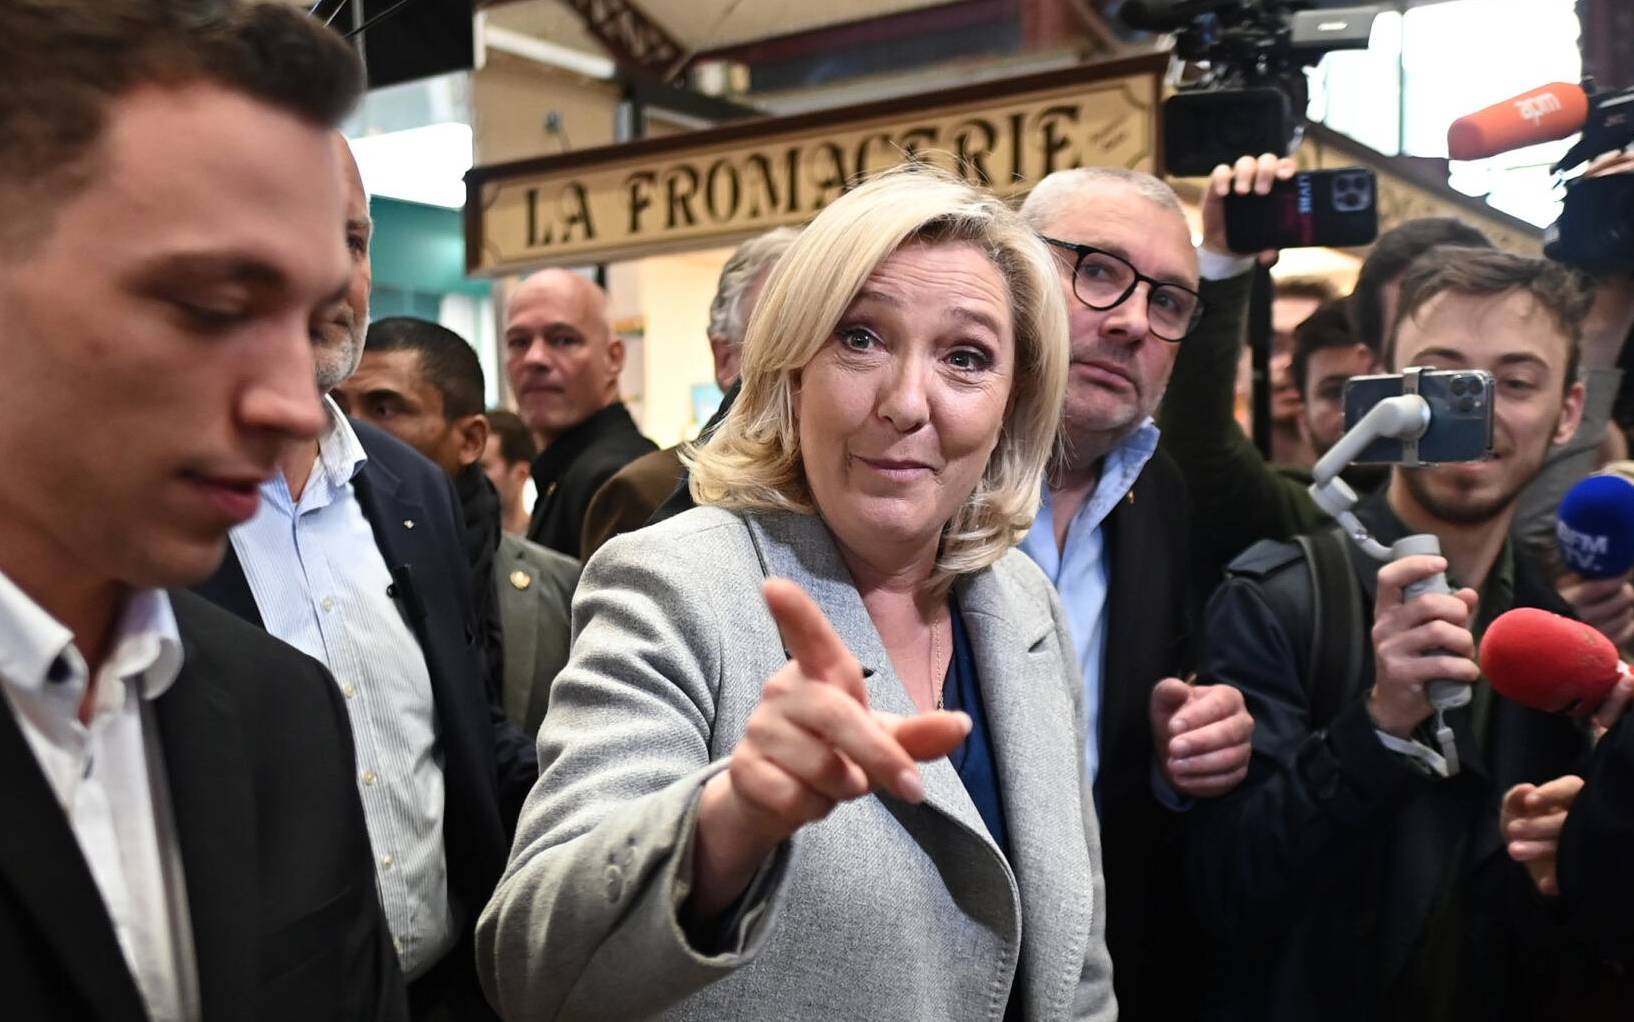 French far-right party Rassemblement National (RN) presidential candidate Marine Le Pen (C)gestures during a campaign trip in Narbonne, southern France, on April 8, 2022, two days before the French presidential election's first round. (Photo by Lionel BONAVENTURE / AFP)